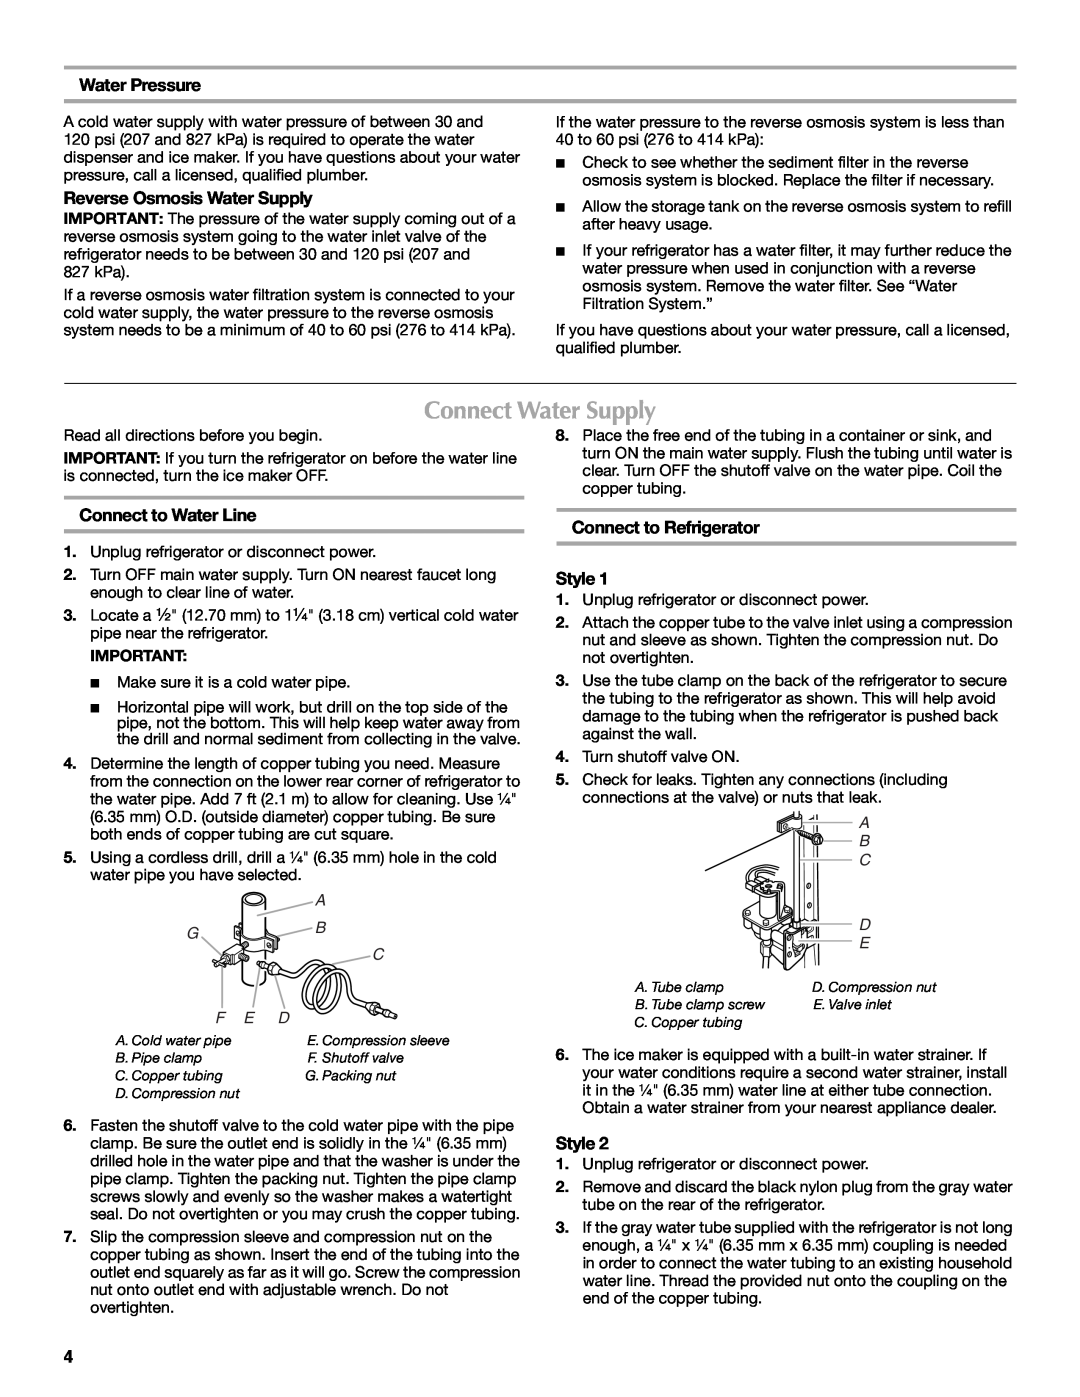 Maytag W10213163A manual Connect Water Supply, Water Pressure, Reverse Osmosis Water Supply, Connect to Water Line, Style 